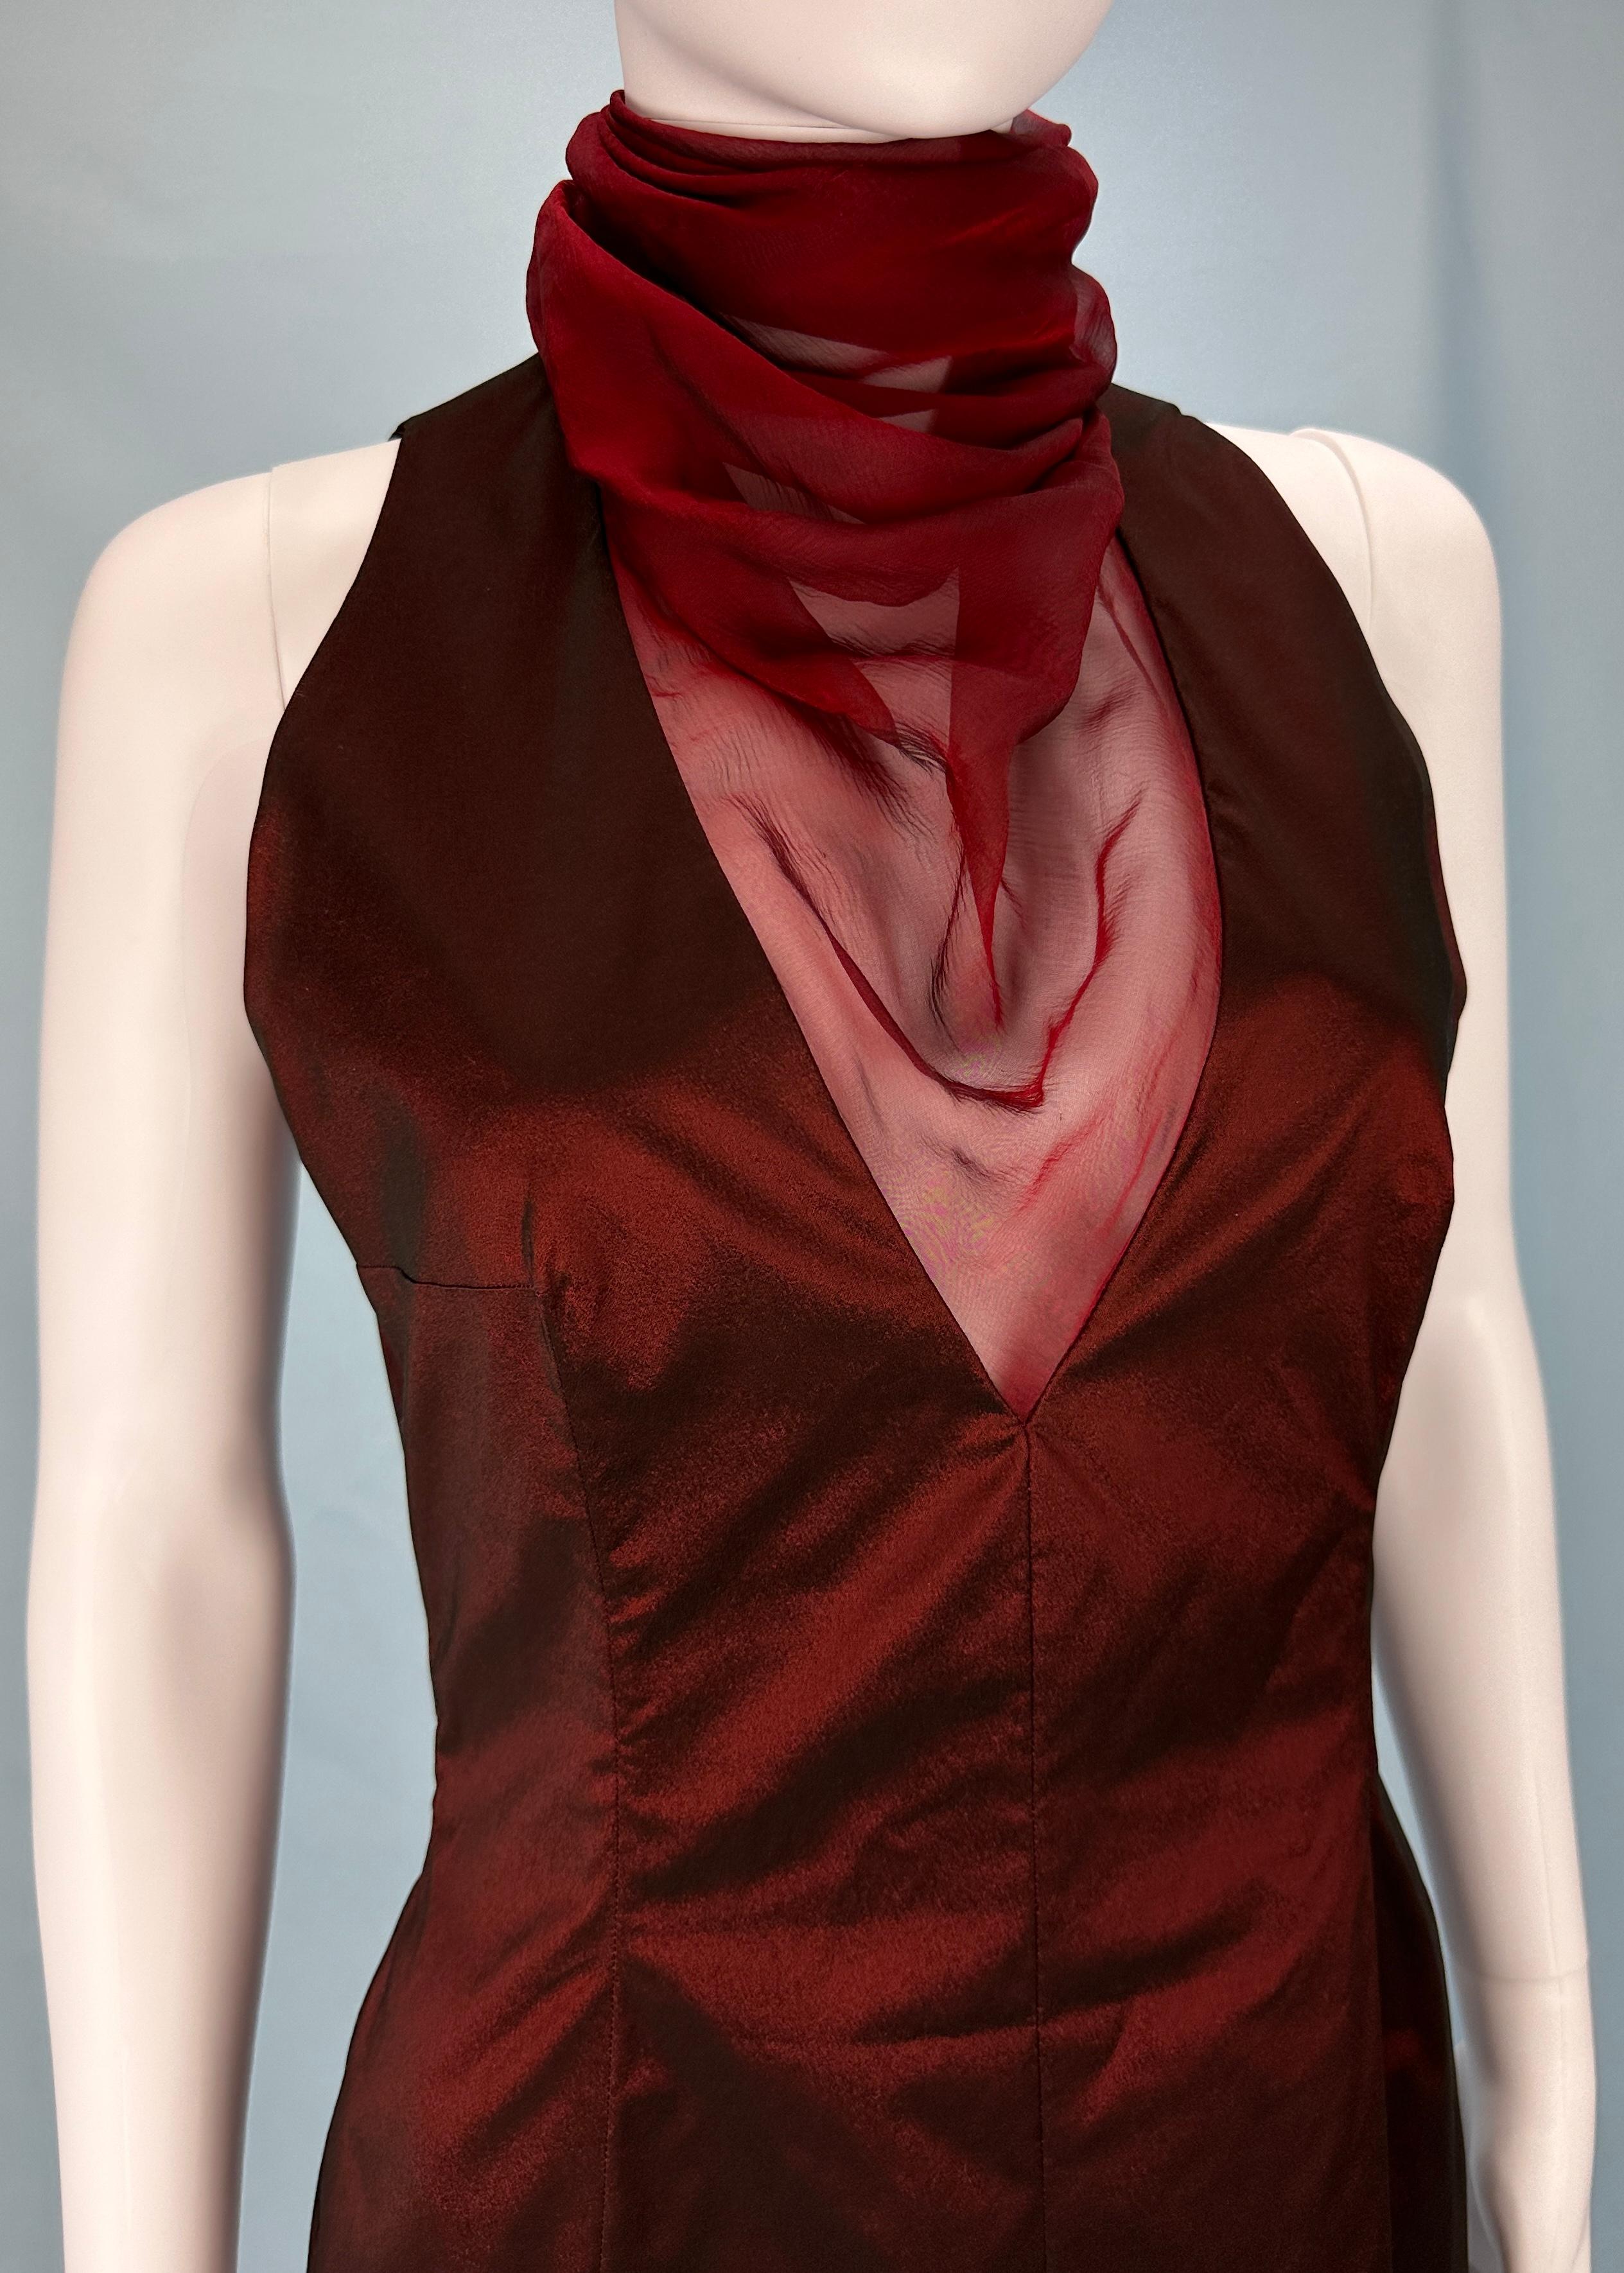 Women's Givenchy Couture by Alexander McQueen Fall 1998 Red Chiffon Mock Neck Dress For Sale